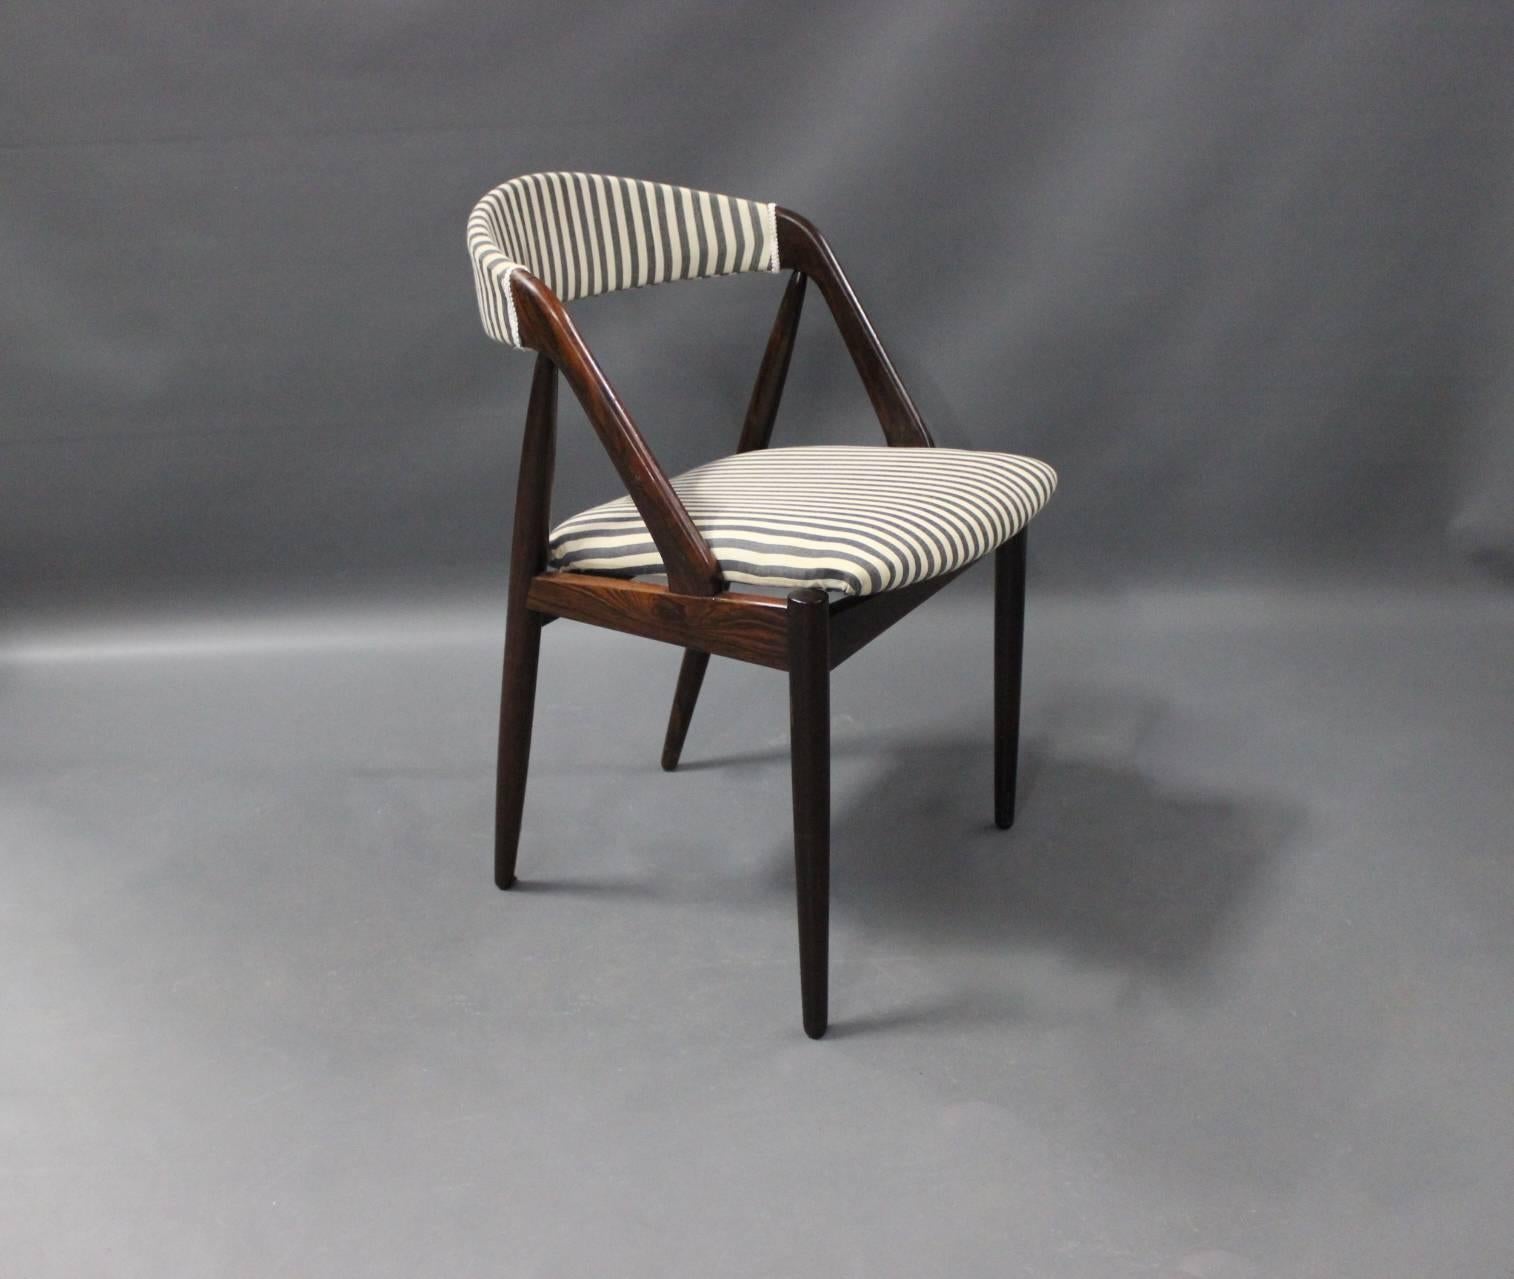 A set of six dining room chairs, model 31, designed by Kai Kristiansen in 1956 and manufactured by Schou Andersen in the 1960s. The chairs are in Brazilian rosewood and upholstered in stribed fabric.